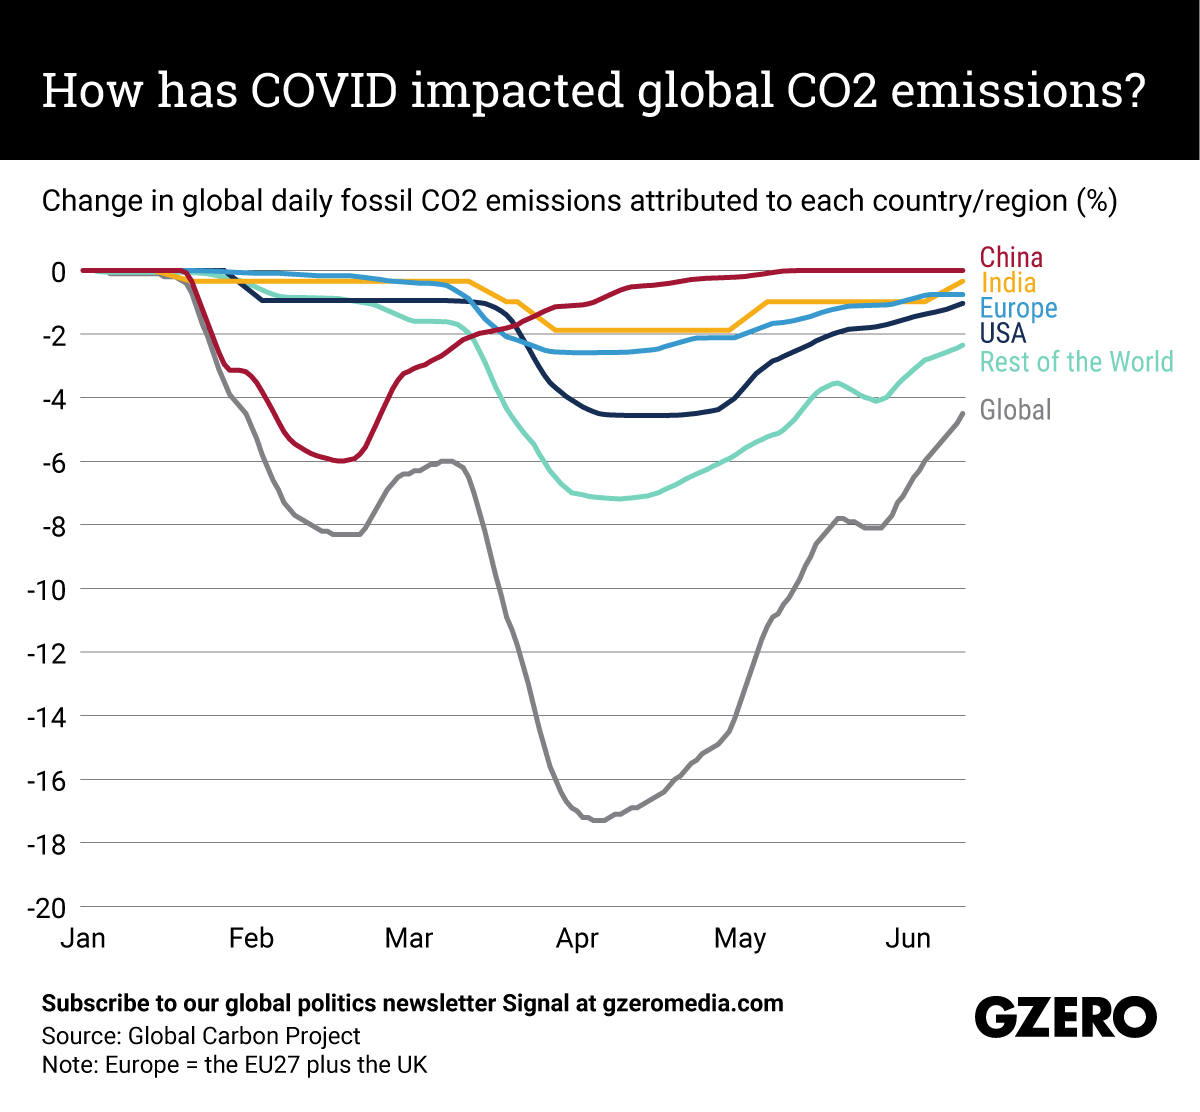 The Graphic Truth: How has COVID impacted global CO2 emissions?